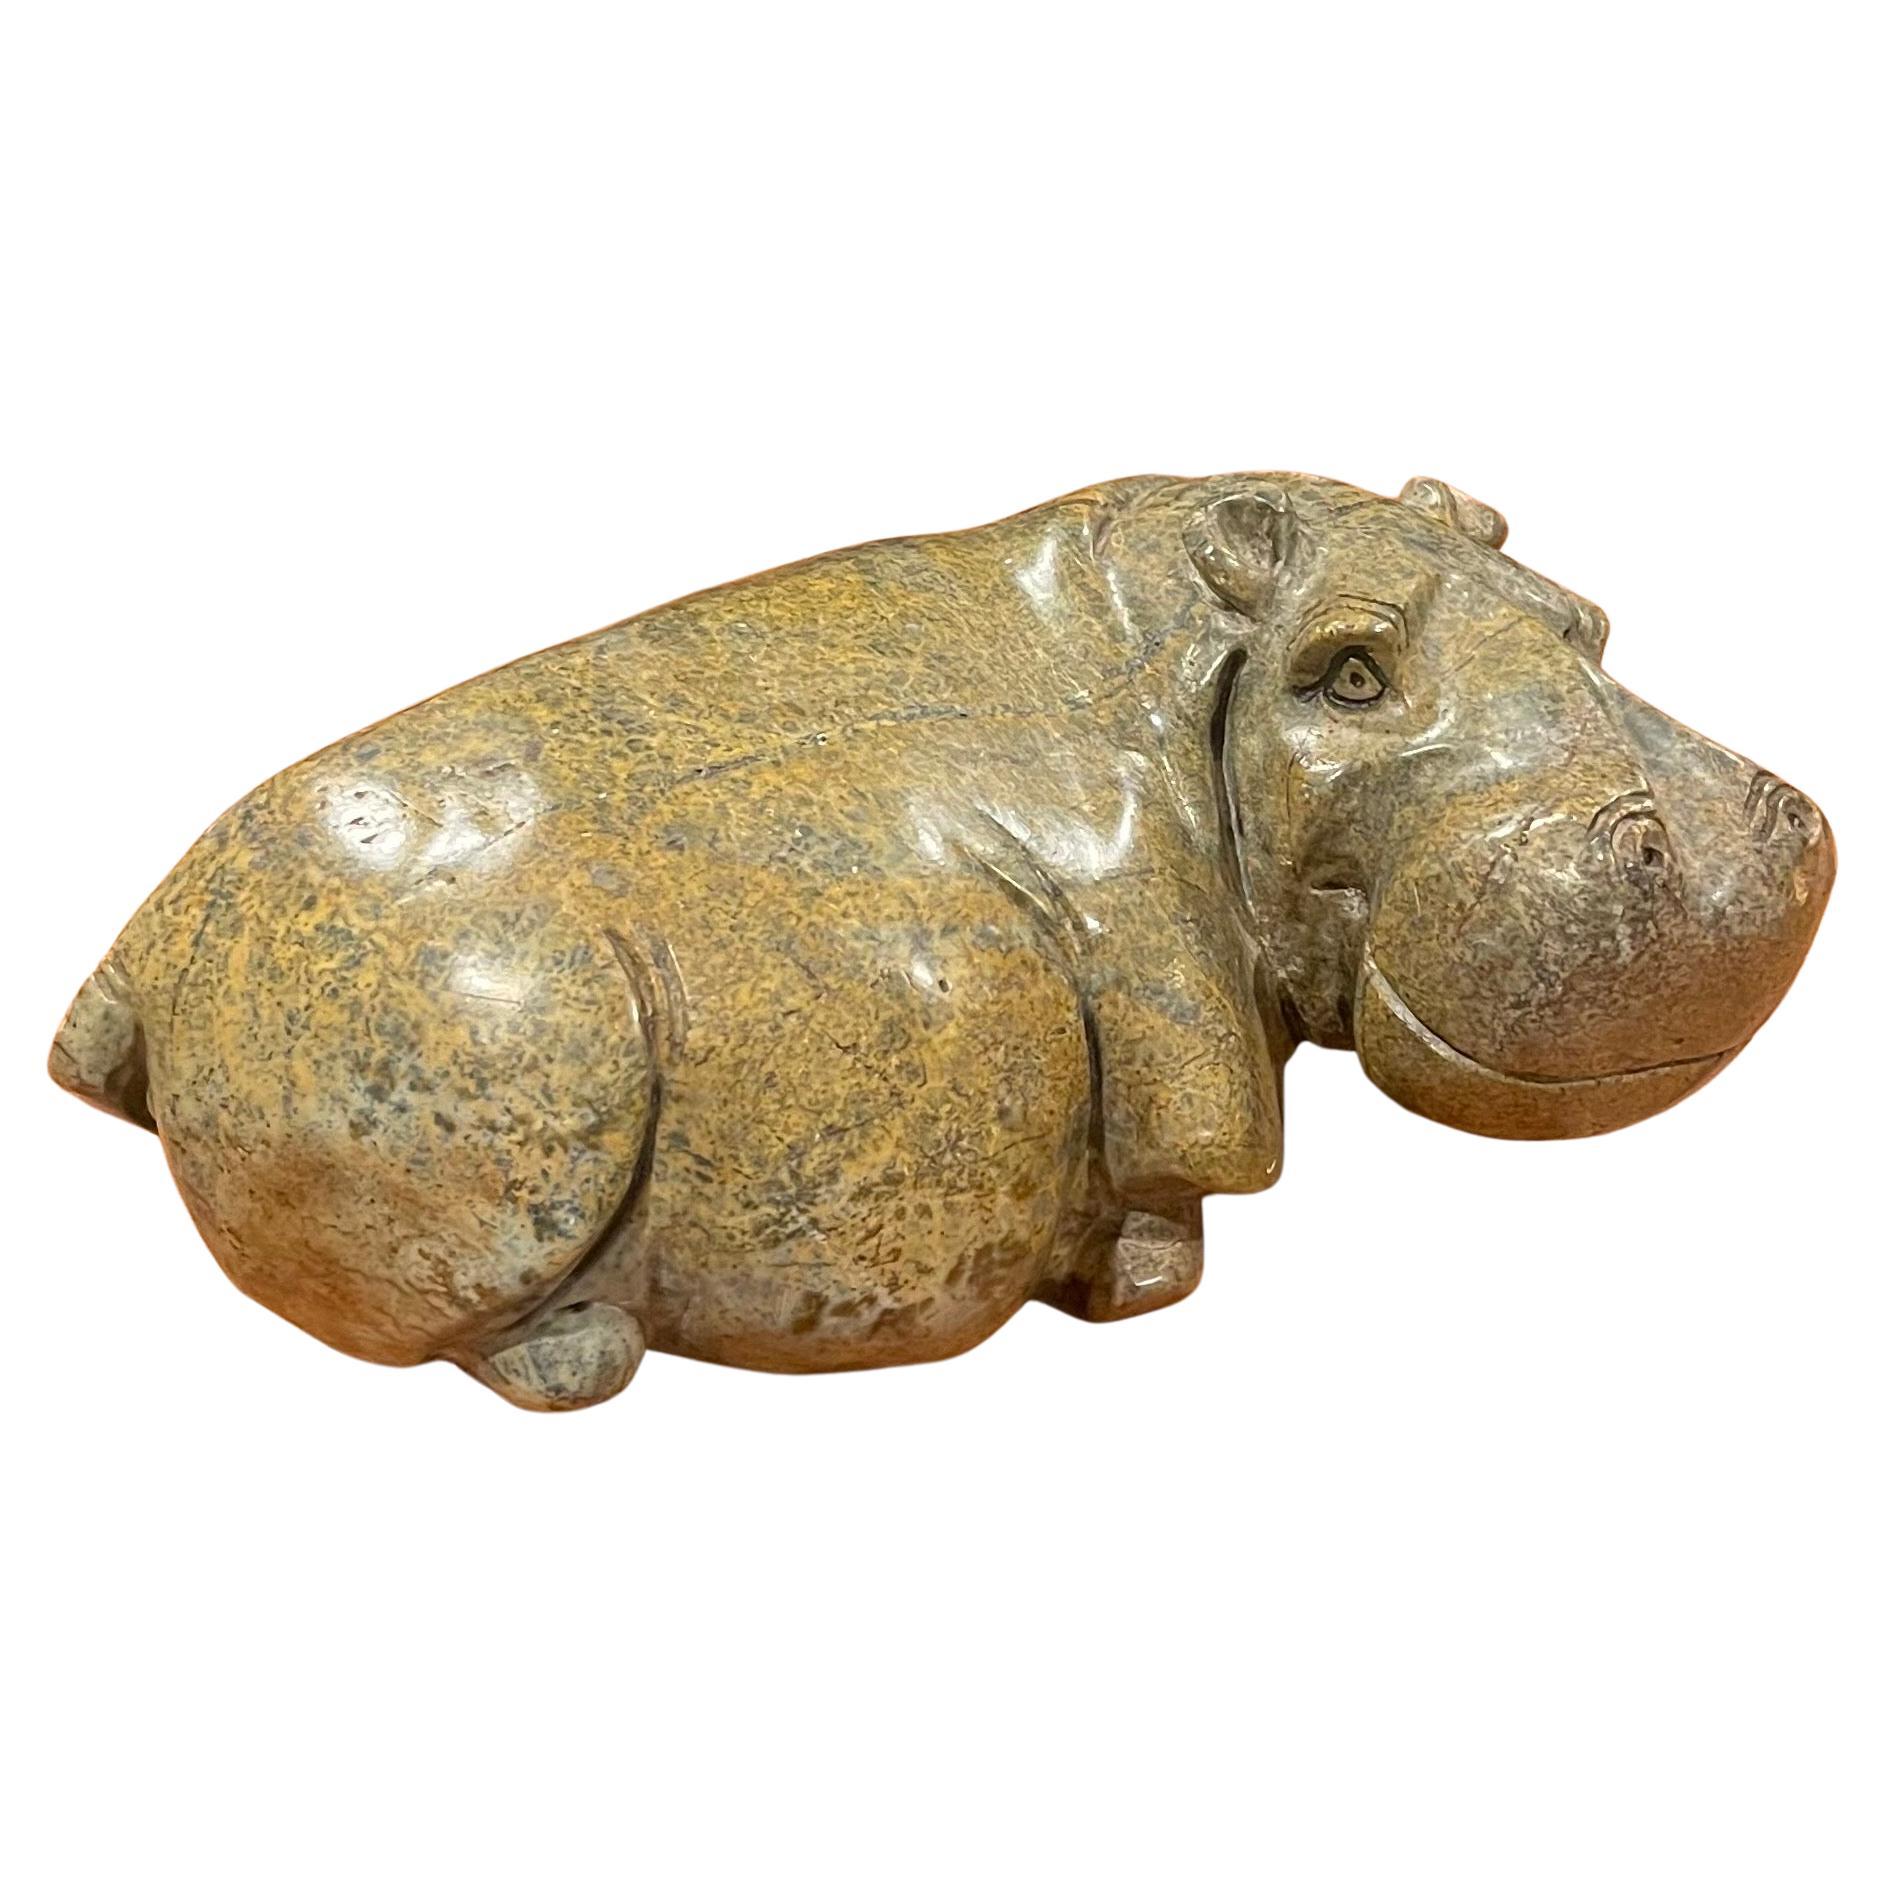 A very nice solid verdite hand carved figural hippopotamus sculpture, circa 1980s. The piece is in very good condition and measures 8.5